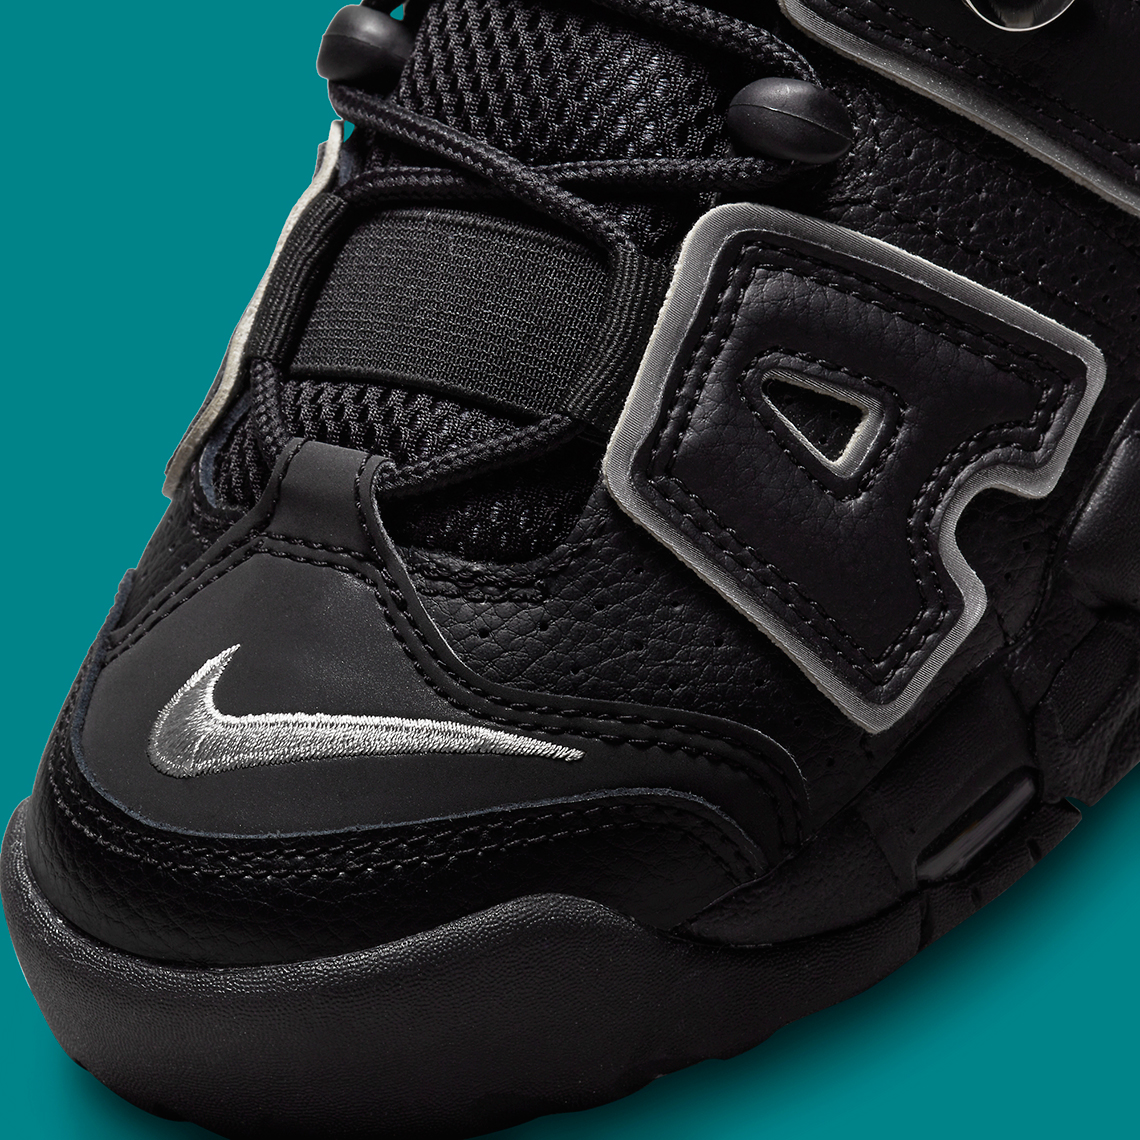 Nike Air More Uptempo Black Silver Teal Release Date 4